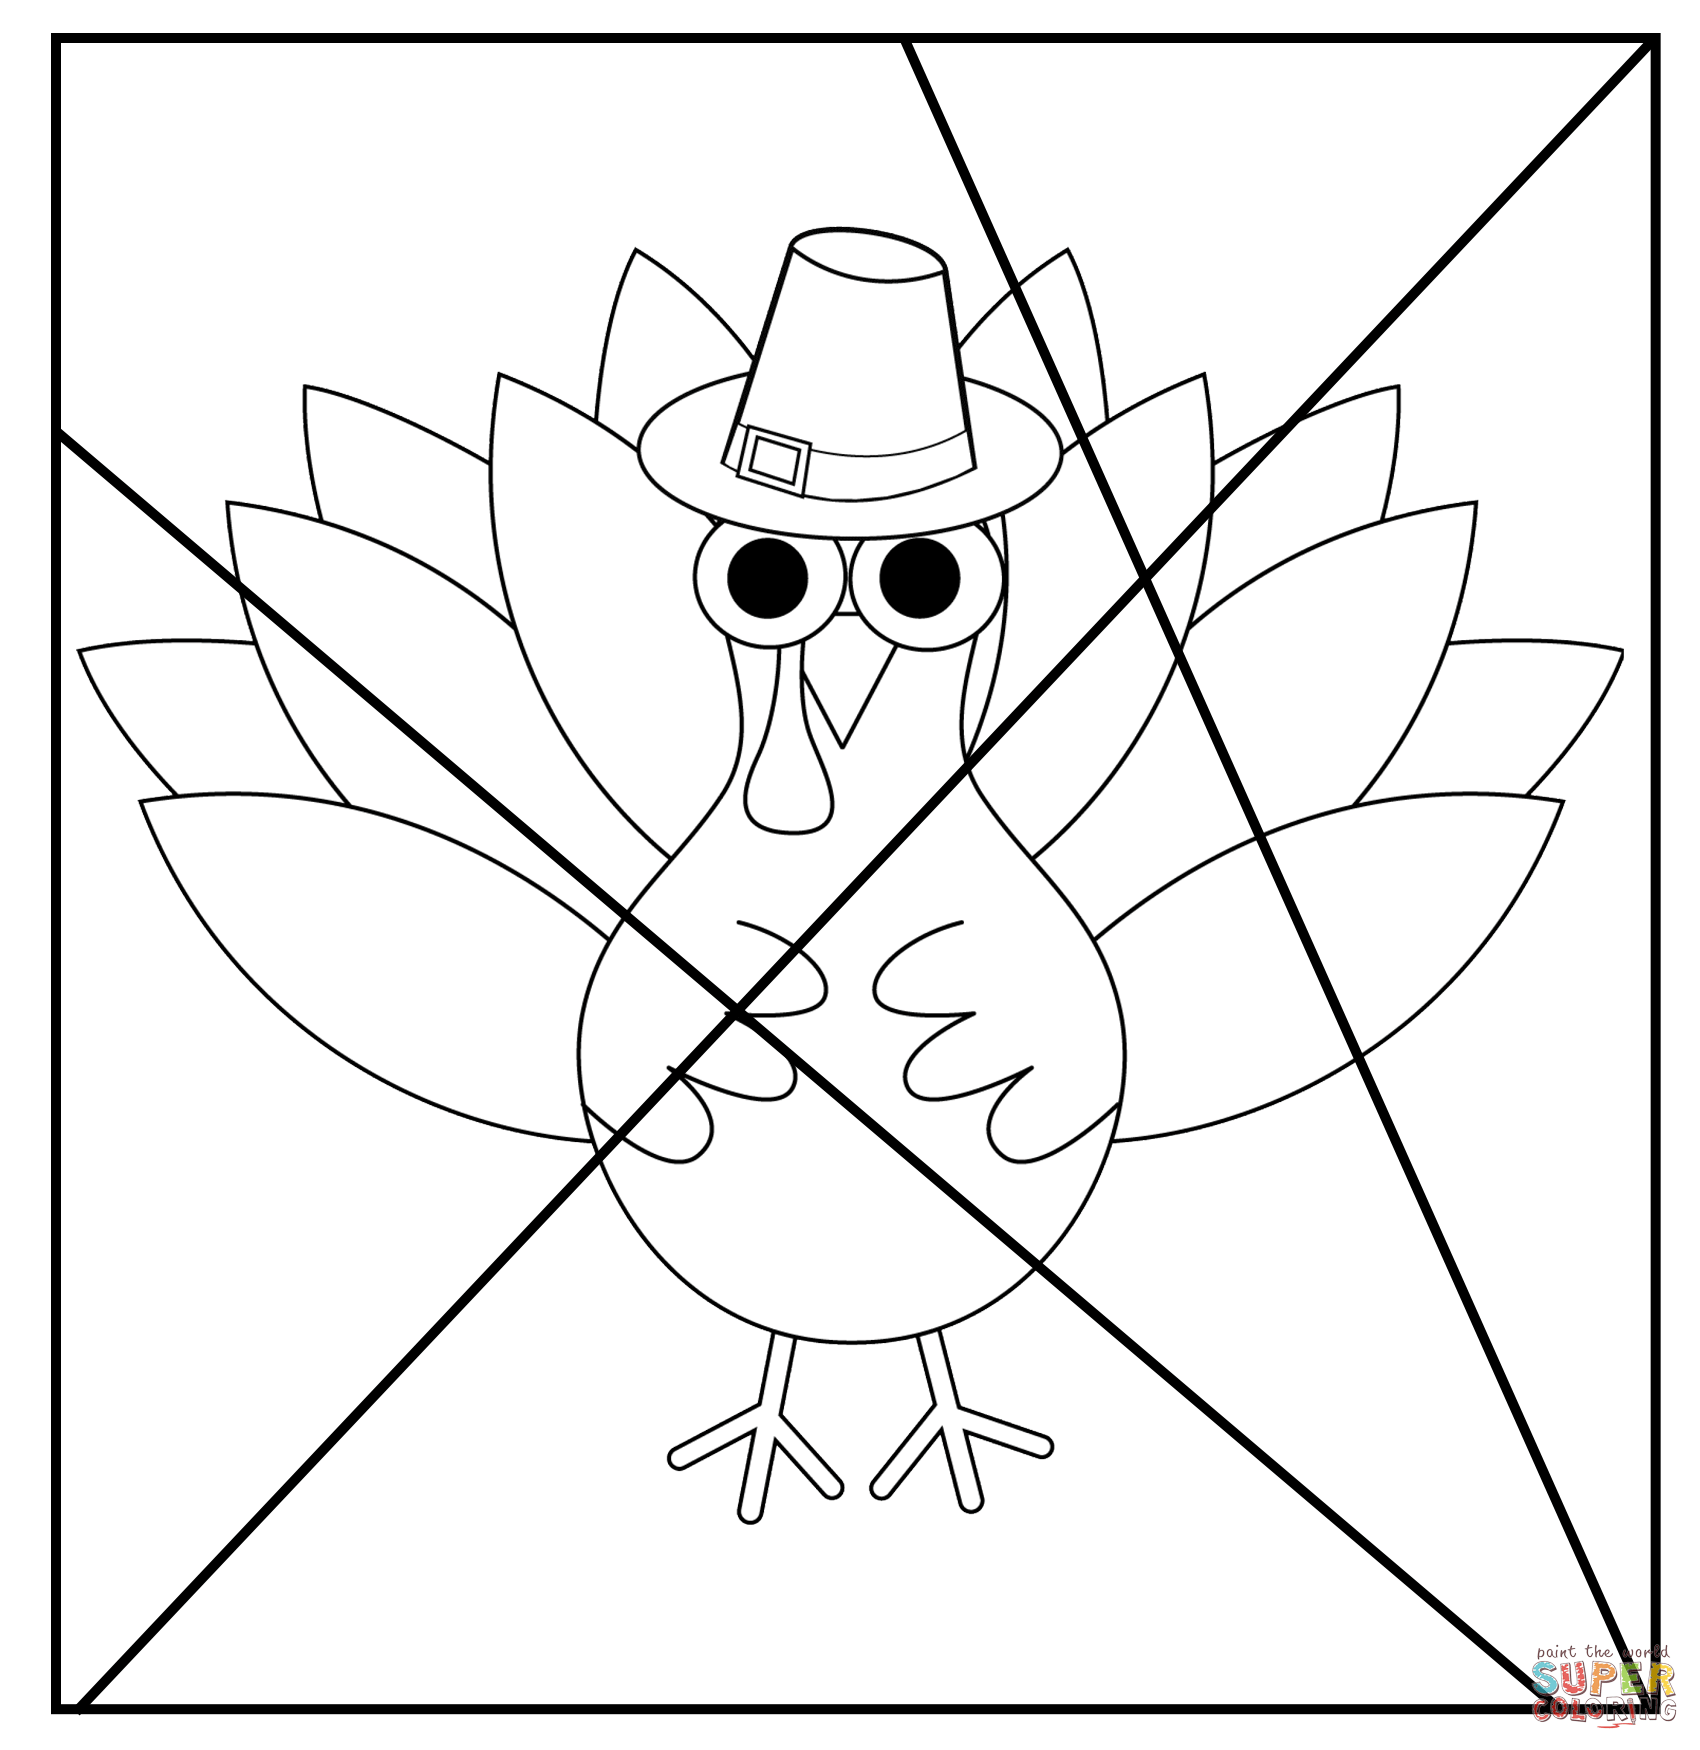 Fill thanksgiving turkey with your own pop art patterns coloring page free printable coloring pages